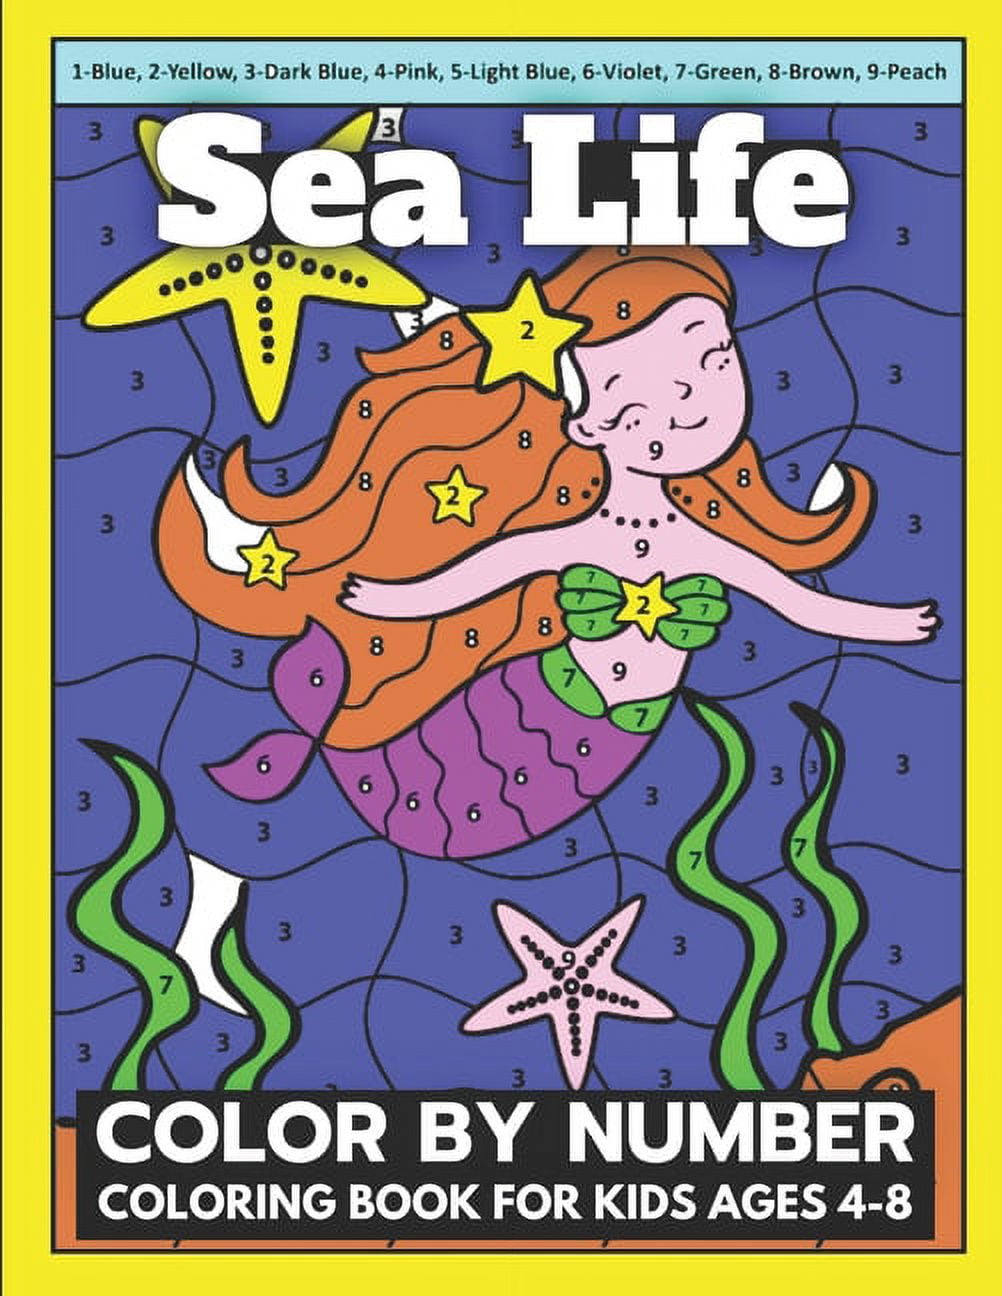 Sea Life Color By Number Coloring Book For Kids Ages 4-8 : Great Coloring  Book for Toddlers Ages 4-8. Enjoy The Amazing Short Story. ( Color By  Number